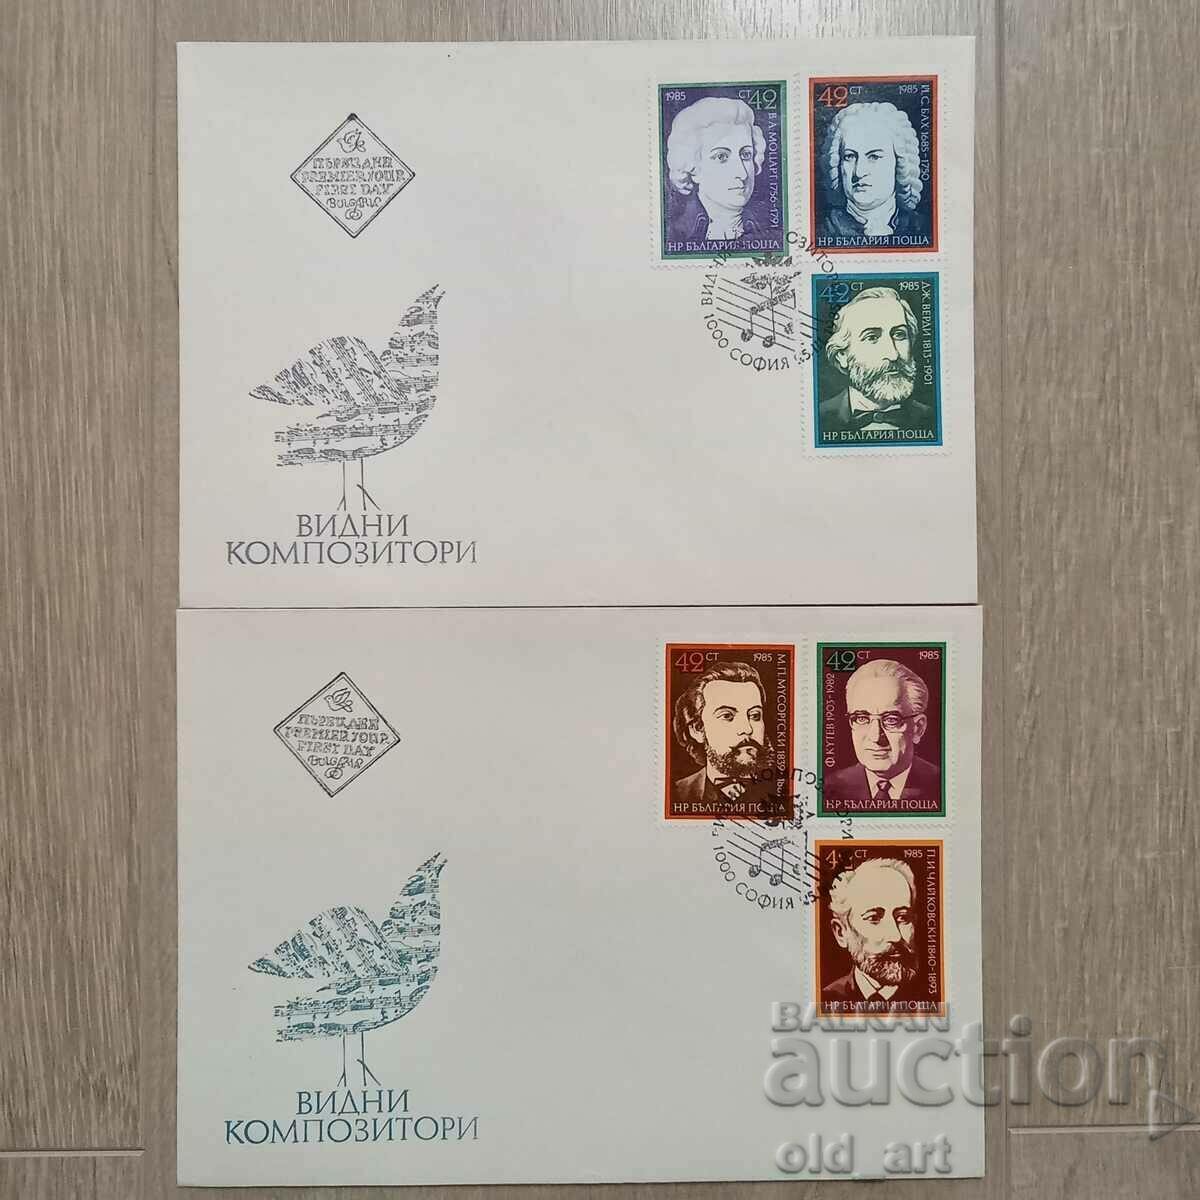 Mailing envelopes - 2 pieces, Prominent composers